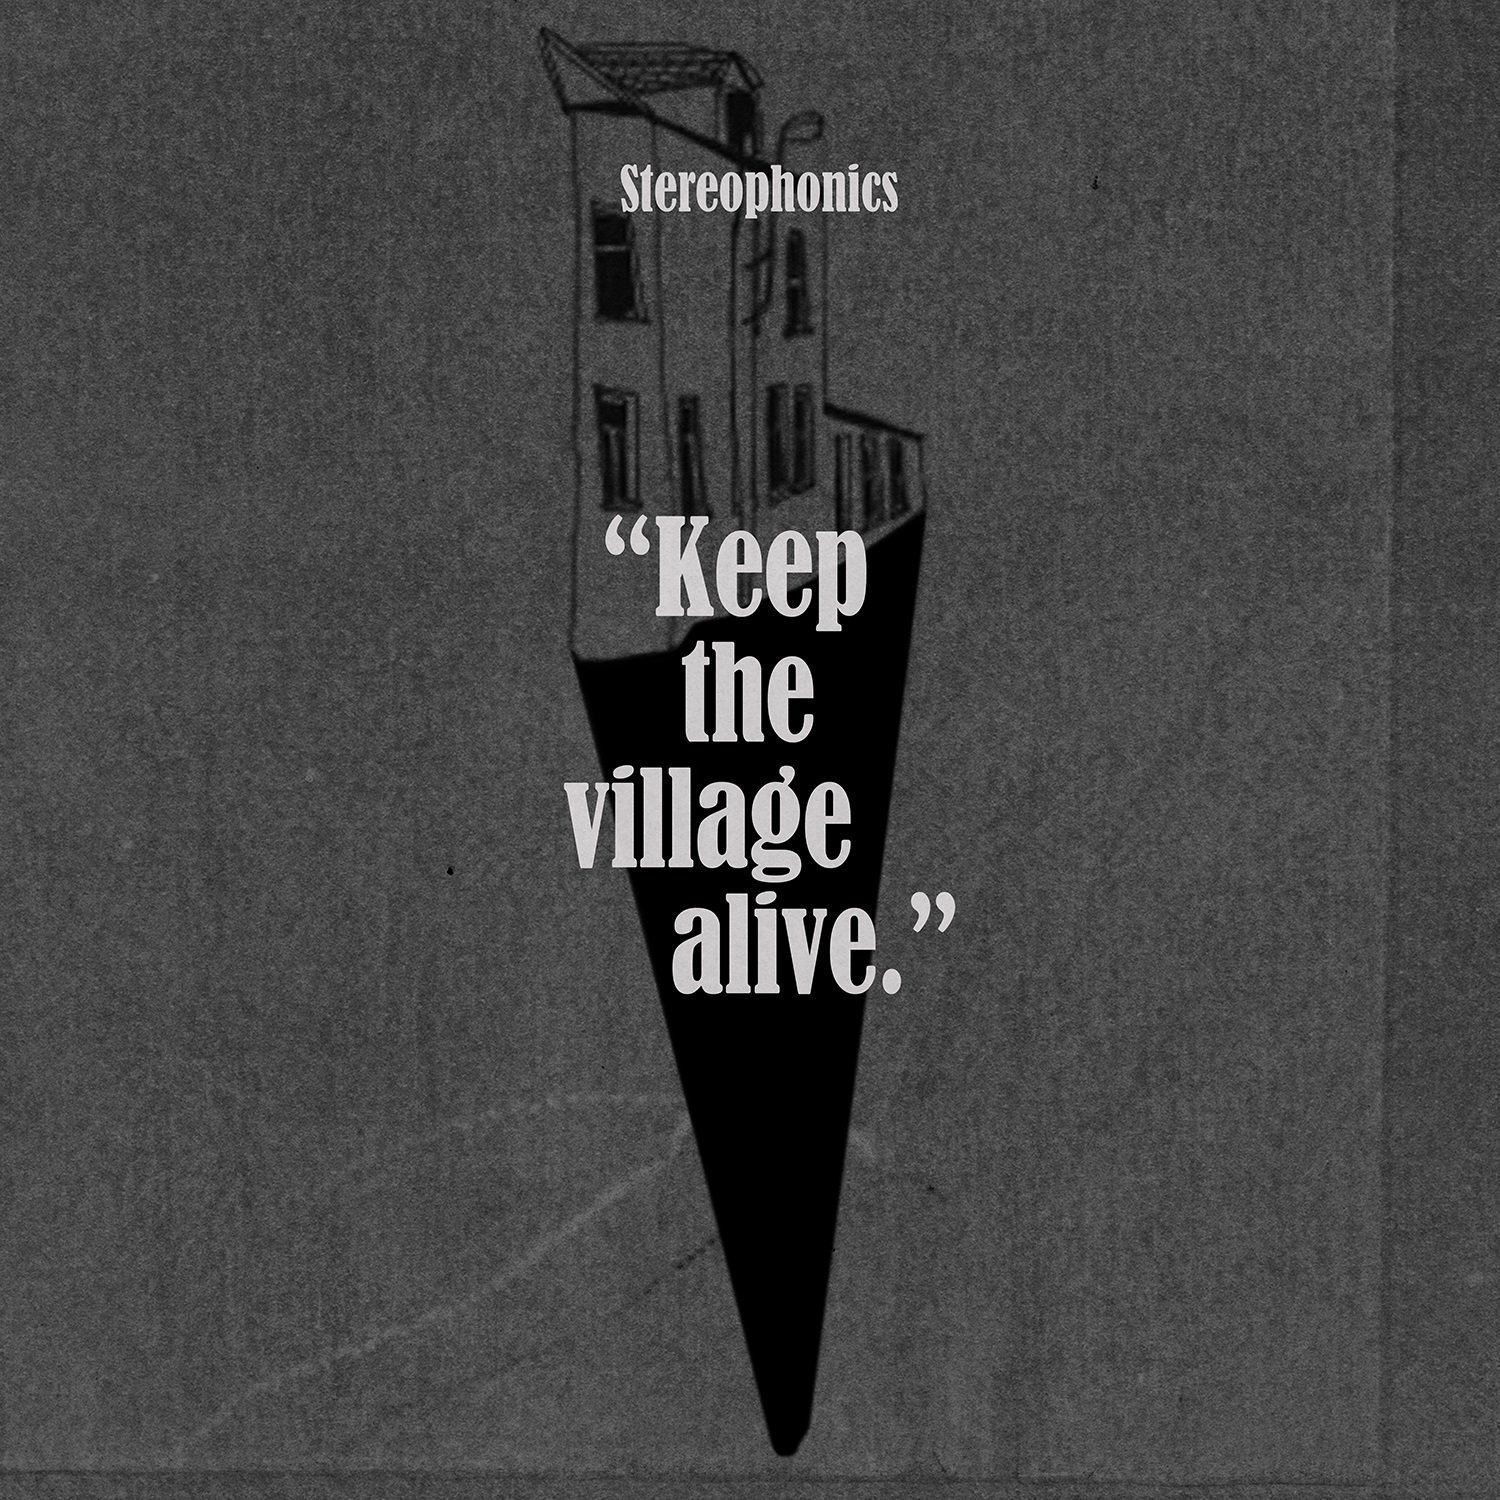 Stereophonics – Keep The Village Alive {Deluxe Edition} (2015) [FLAC 24bit/48kHz]